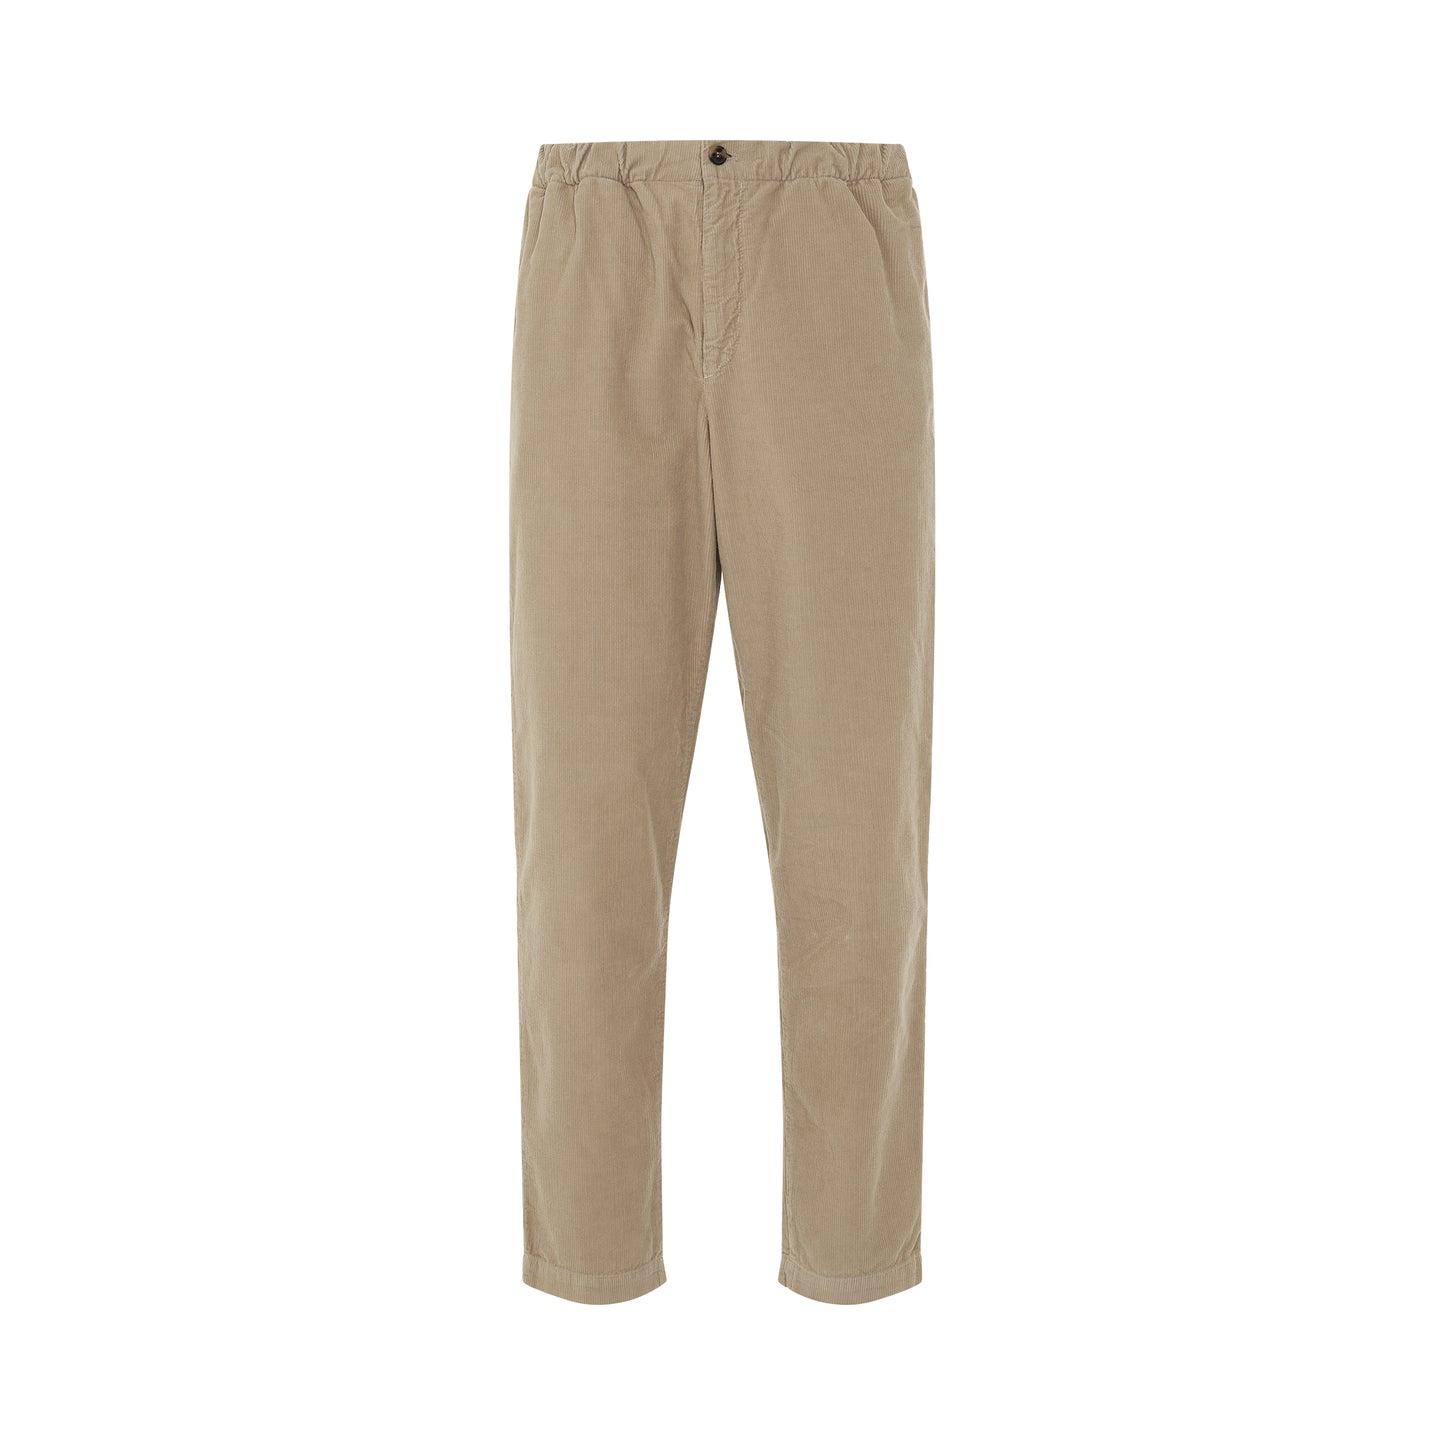 Overdyed Sweat Pant in Sand